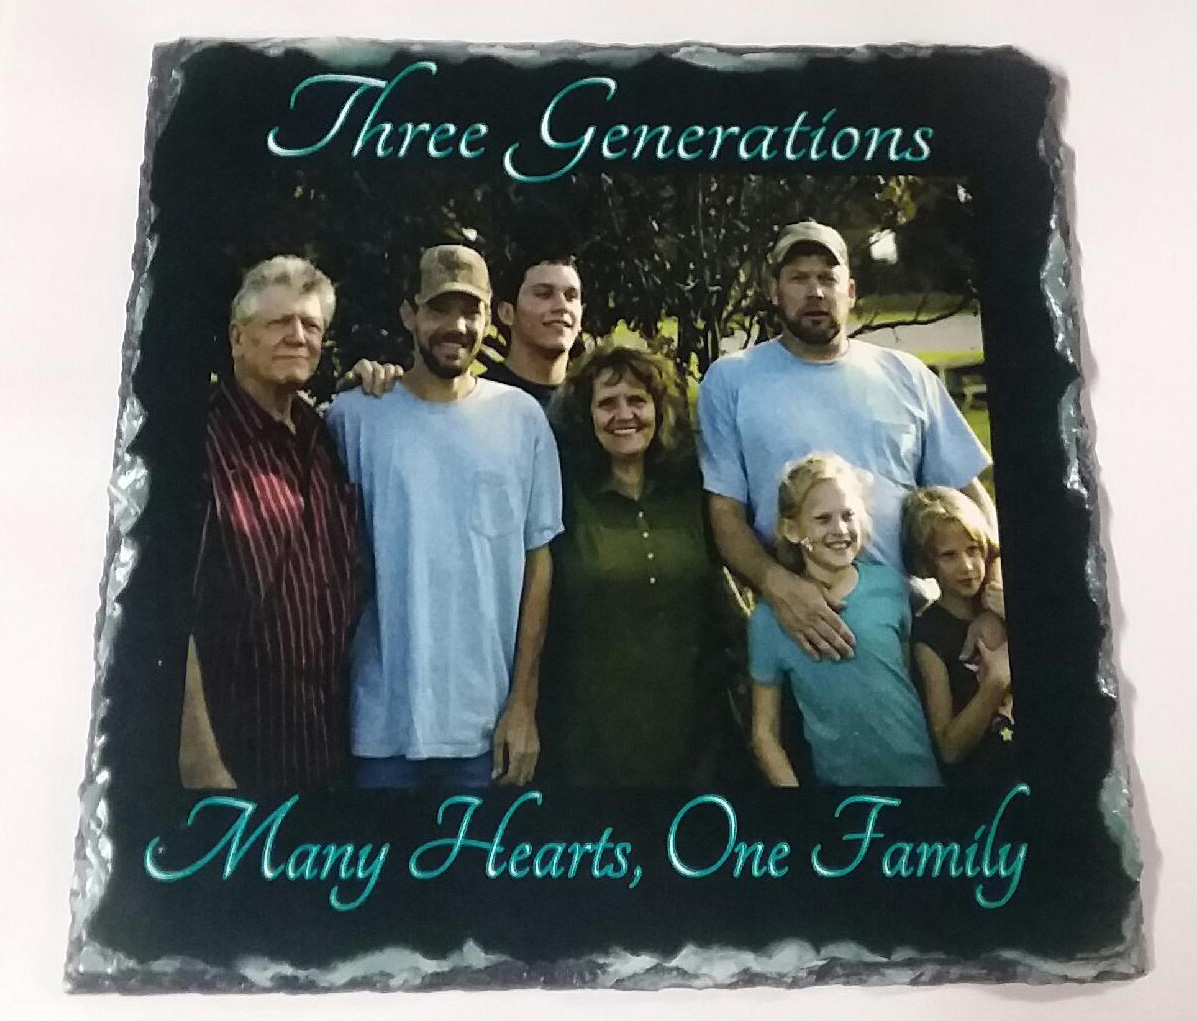 Personalized Photo Slate made with sublimation printing